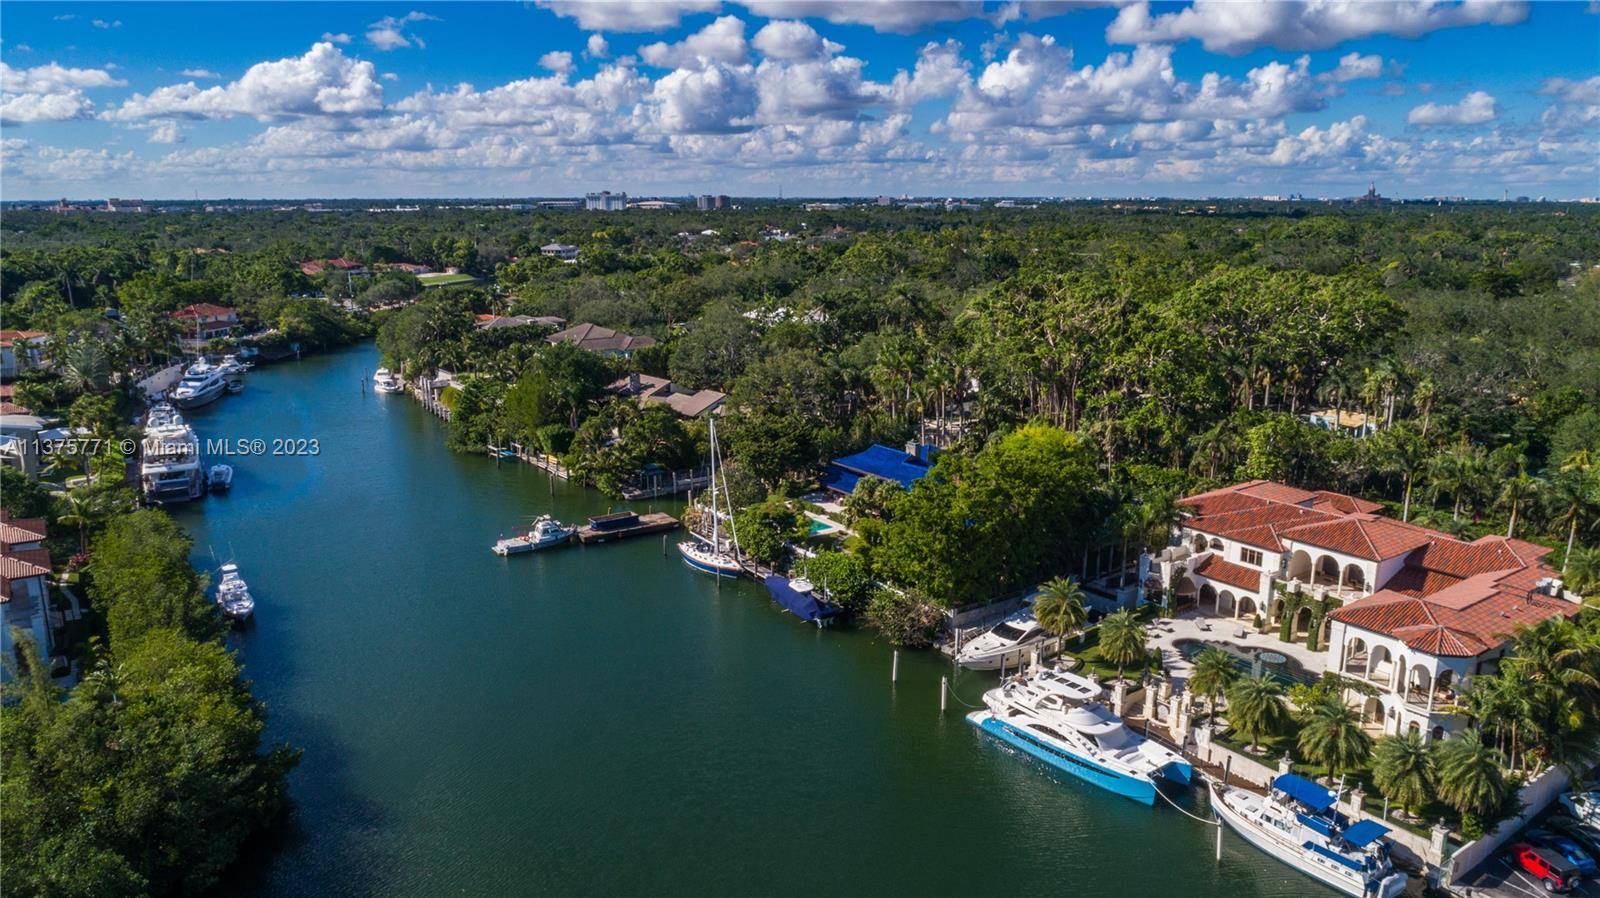 Located on prestigious Edgewater Drive, this elegant Mediterranean style estate spans an expansive 13, 889 sf and boasts 180 ft deep water frontage with private dock and 80 ft inlet ...